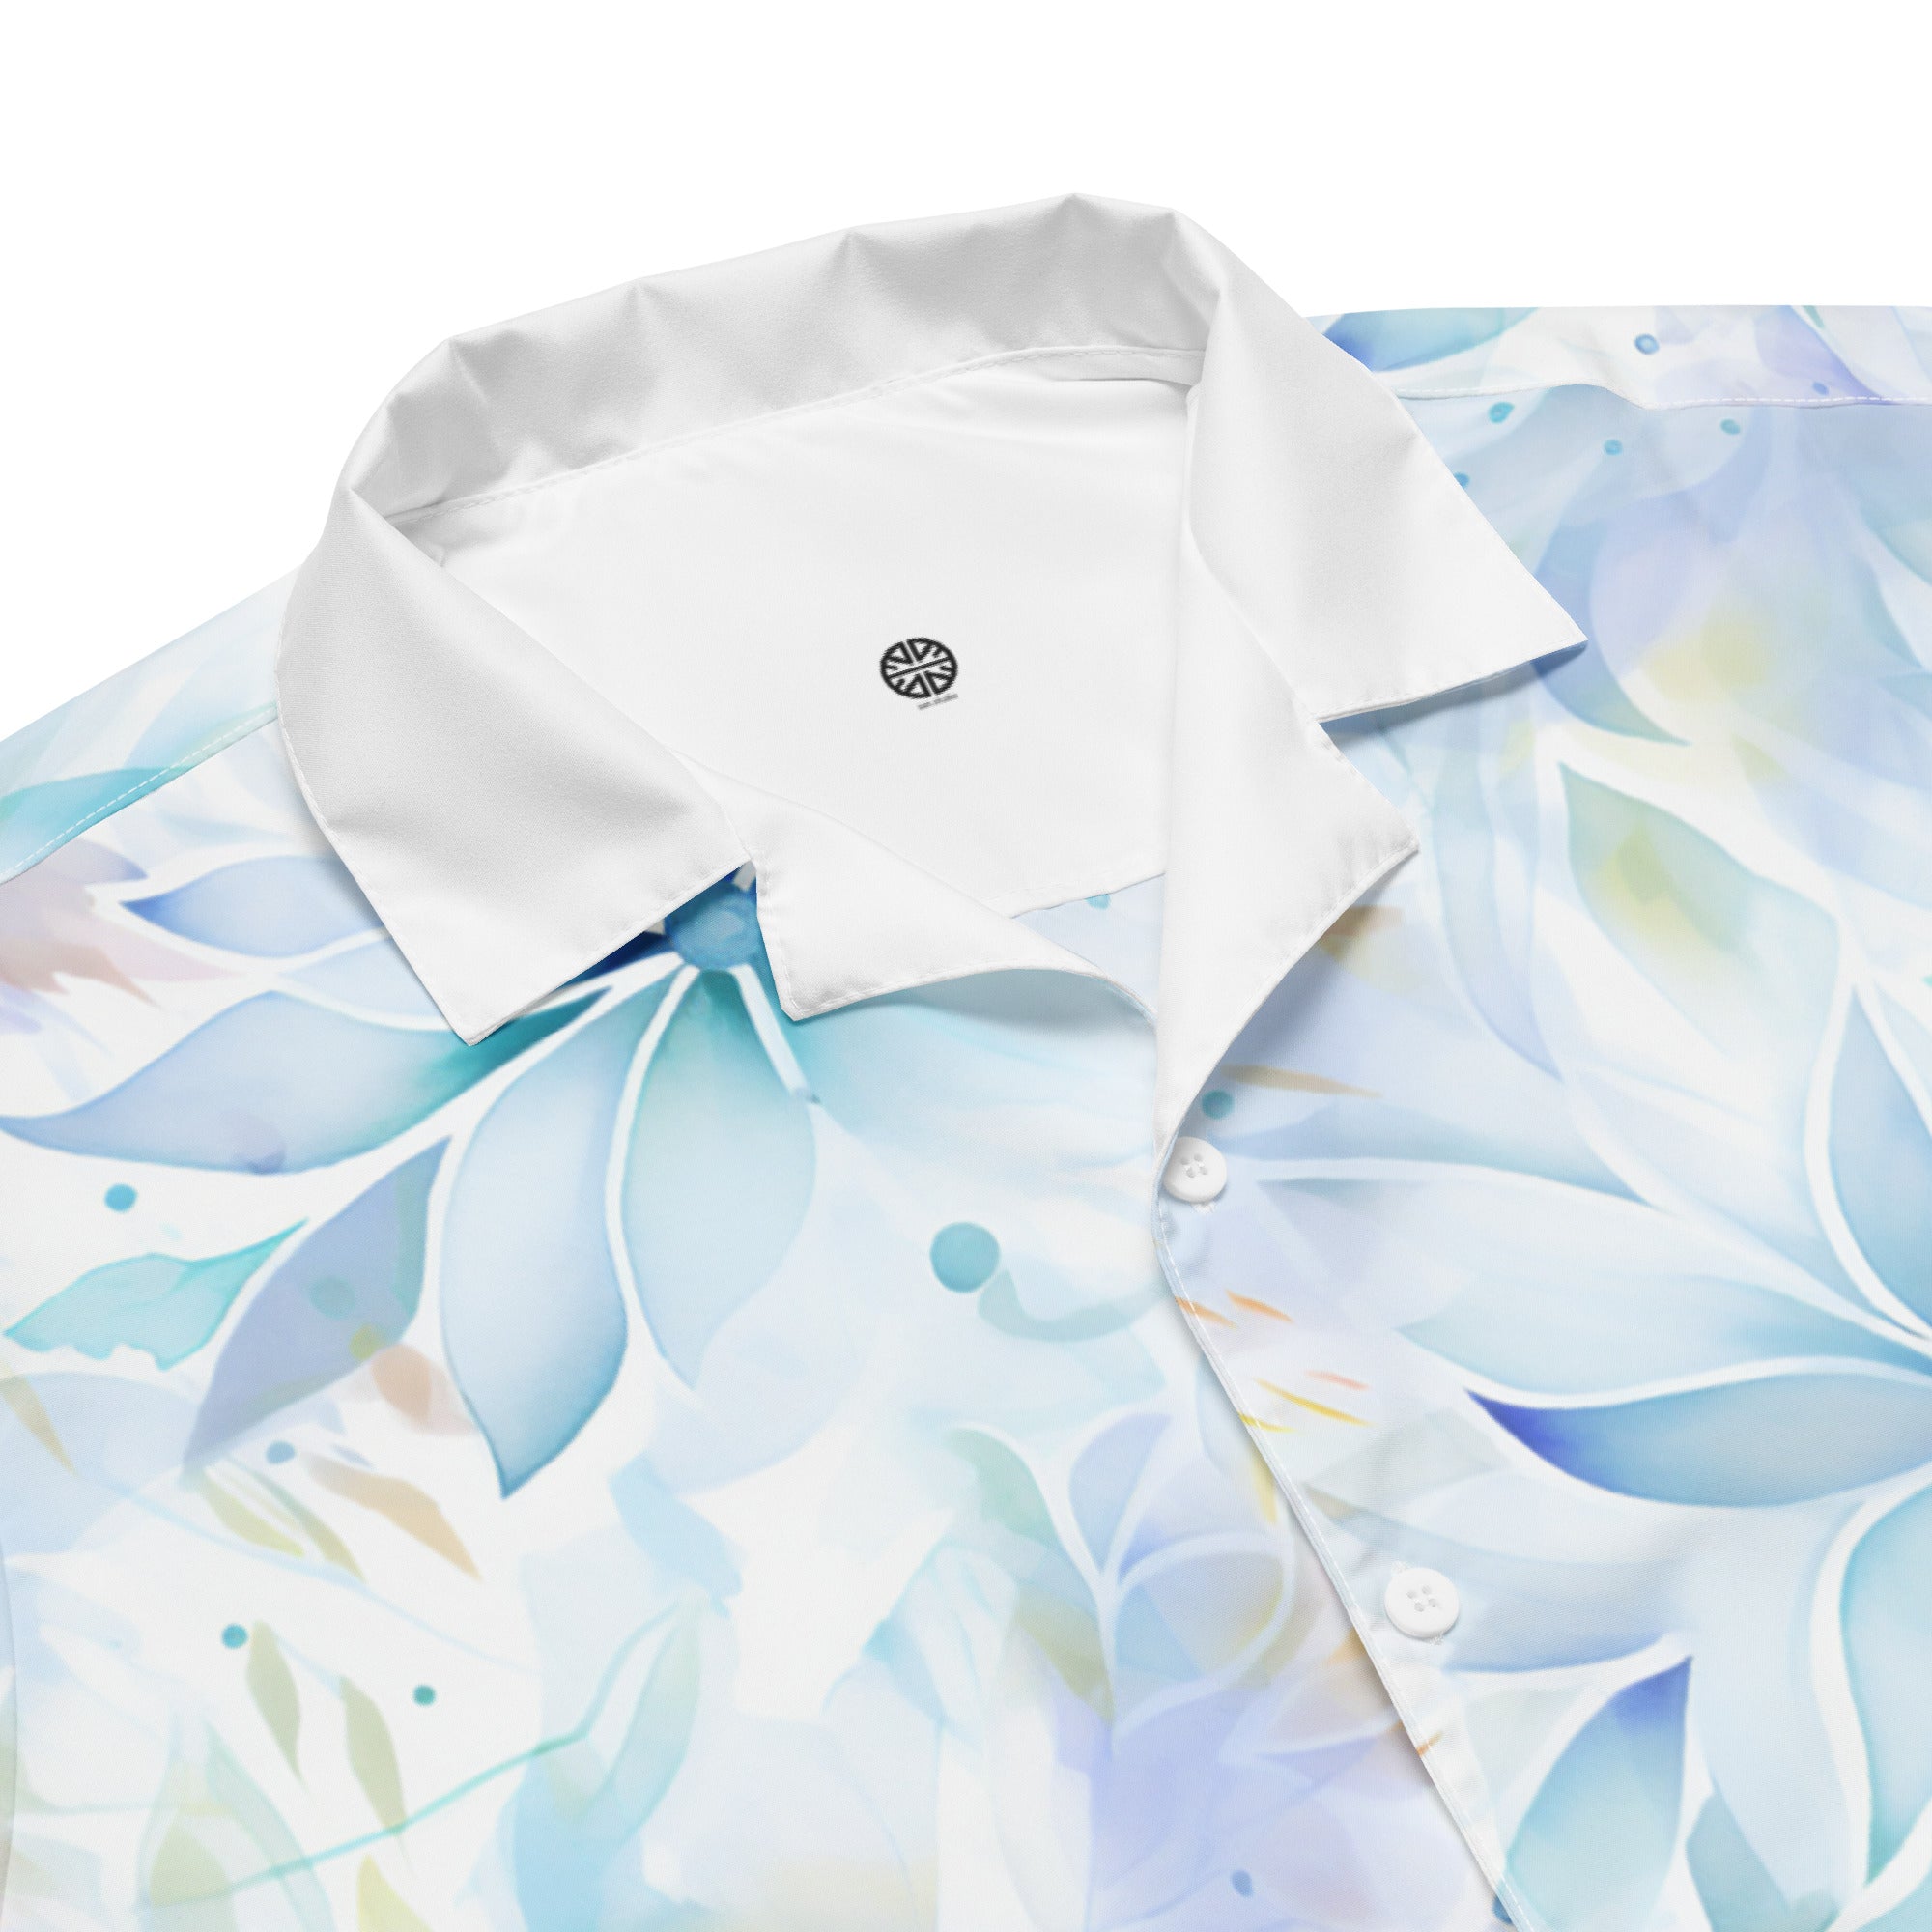 Subtle Elegance in Bloom: Whispering Floral Soft Pastel Unisex Hawaii Shirt - A Chic & Stylish Statement in Every Thread